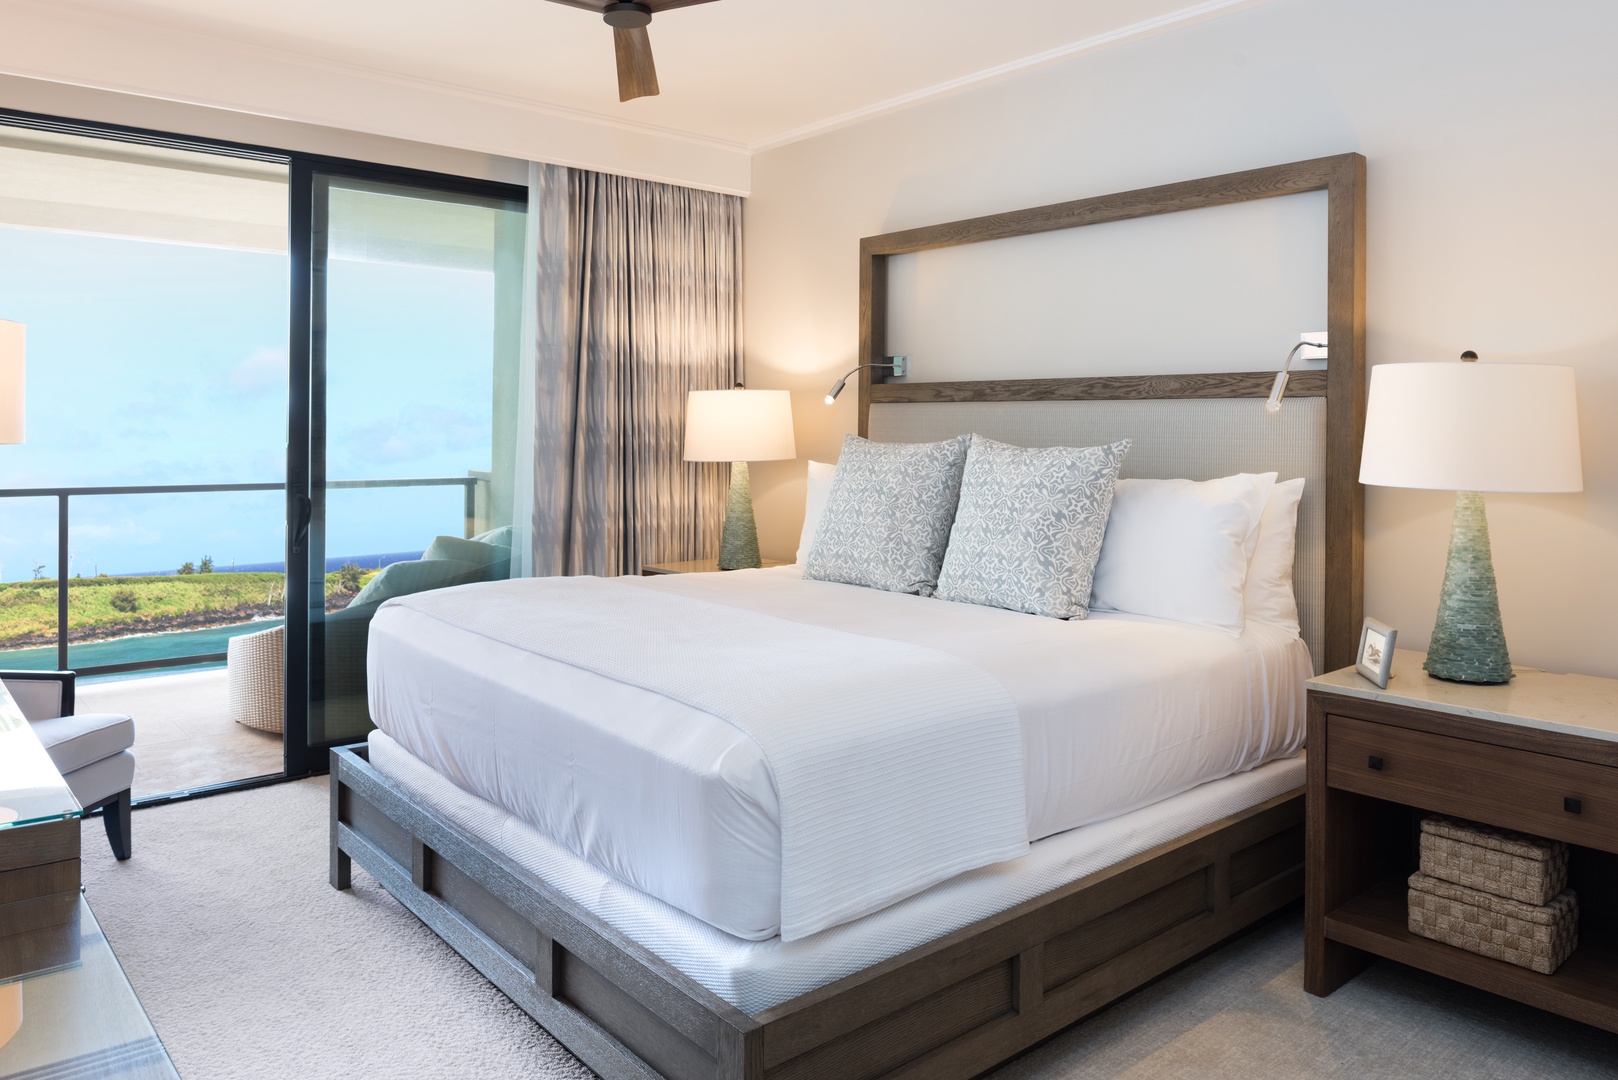 Lihue Vacation Rentals, Maliula at Hokuala 3BR Premiere* - Spacious, luxurious bedrooms feature stunning ocean views.